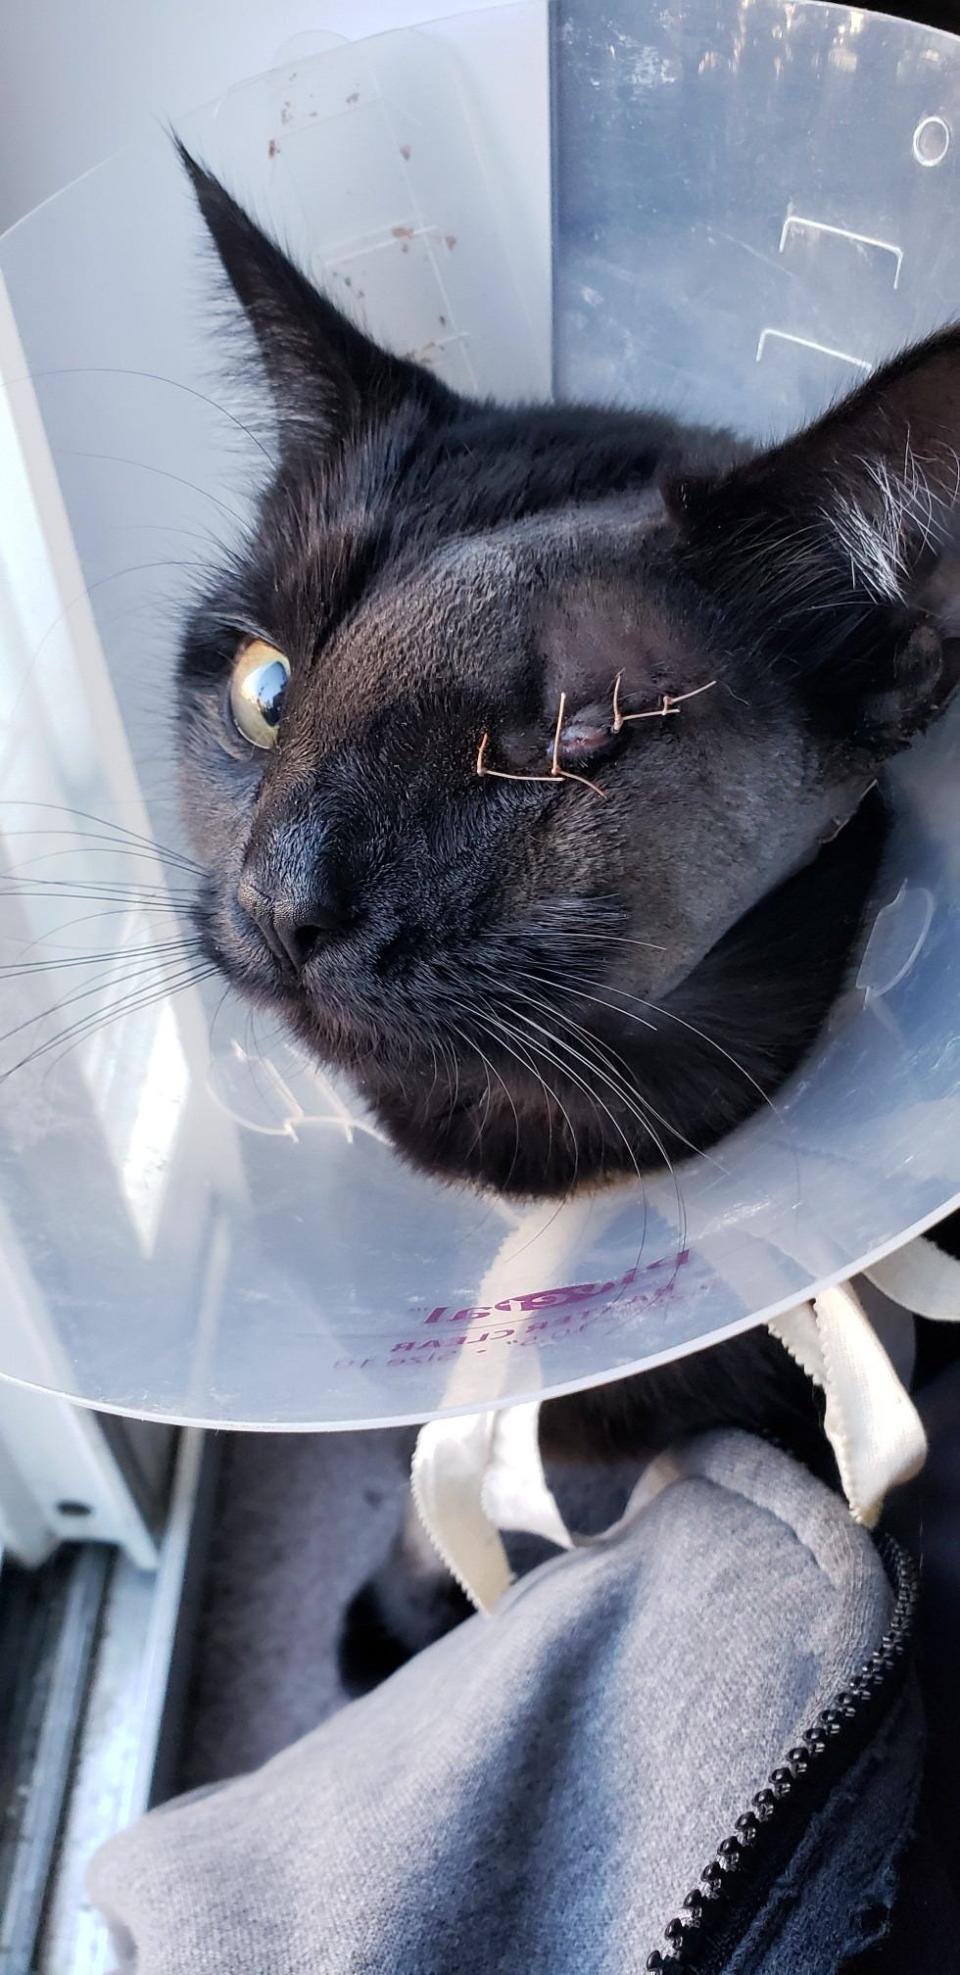 This photo was taken of Jackie, a black cat who was shot and injured in Falls on Nov. 15. Her eye was removed and a projectile remains lodged near her brain.